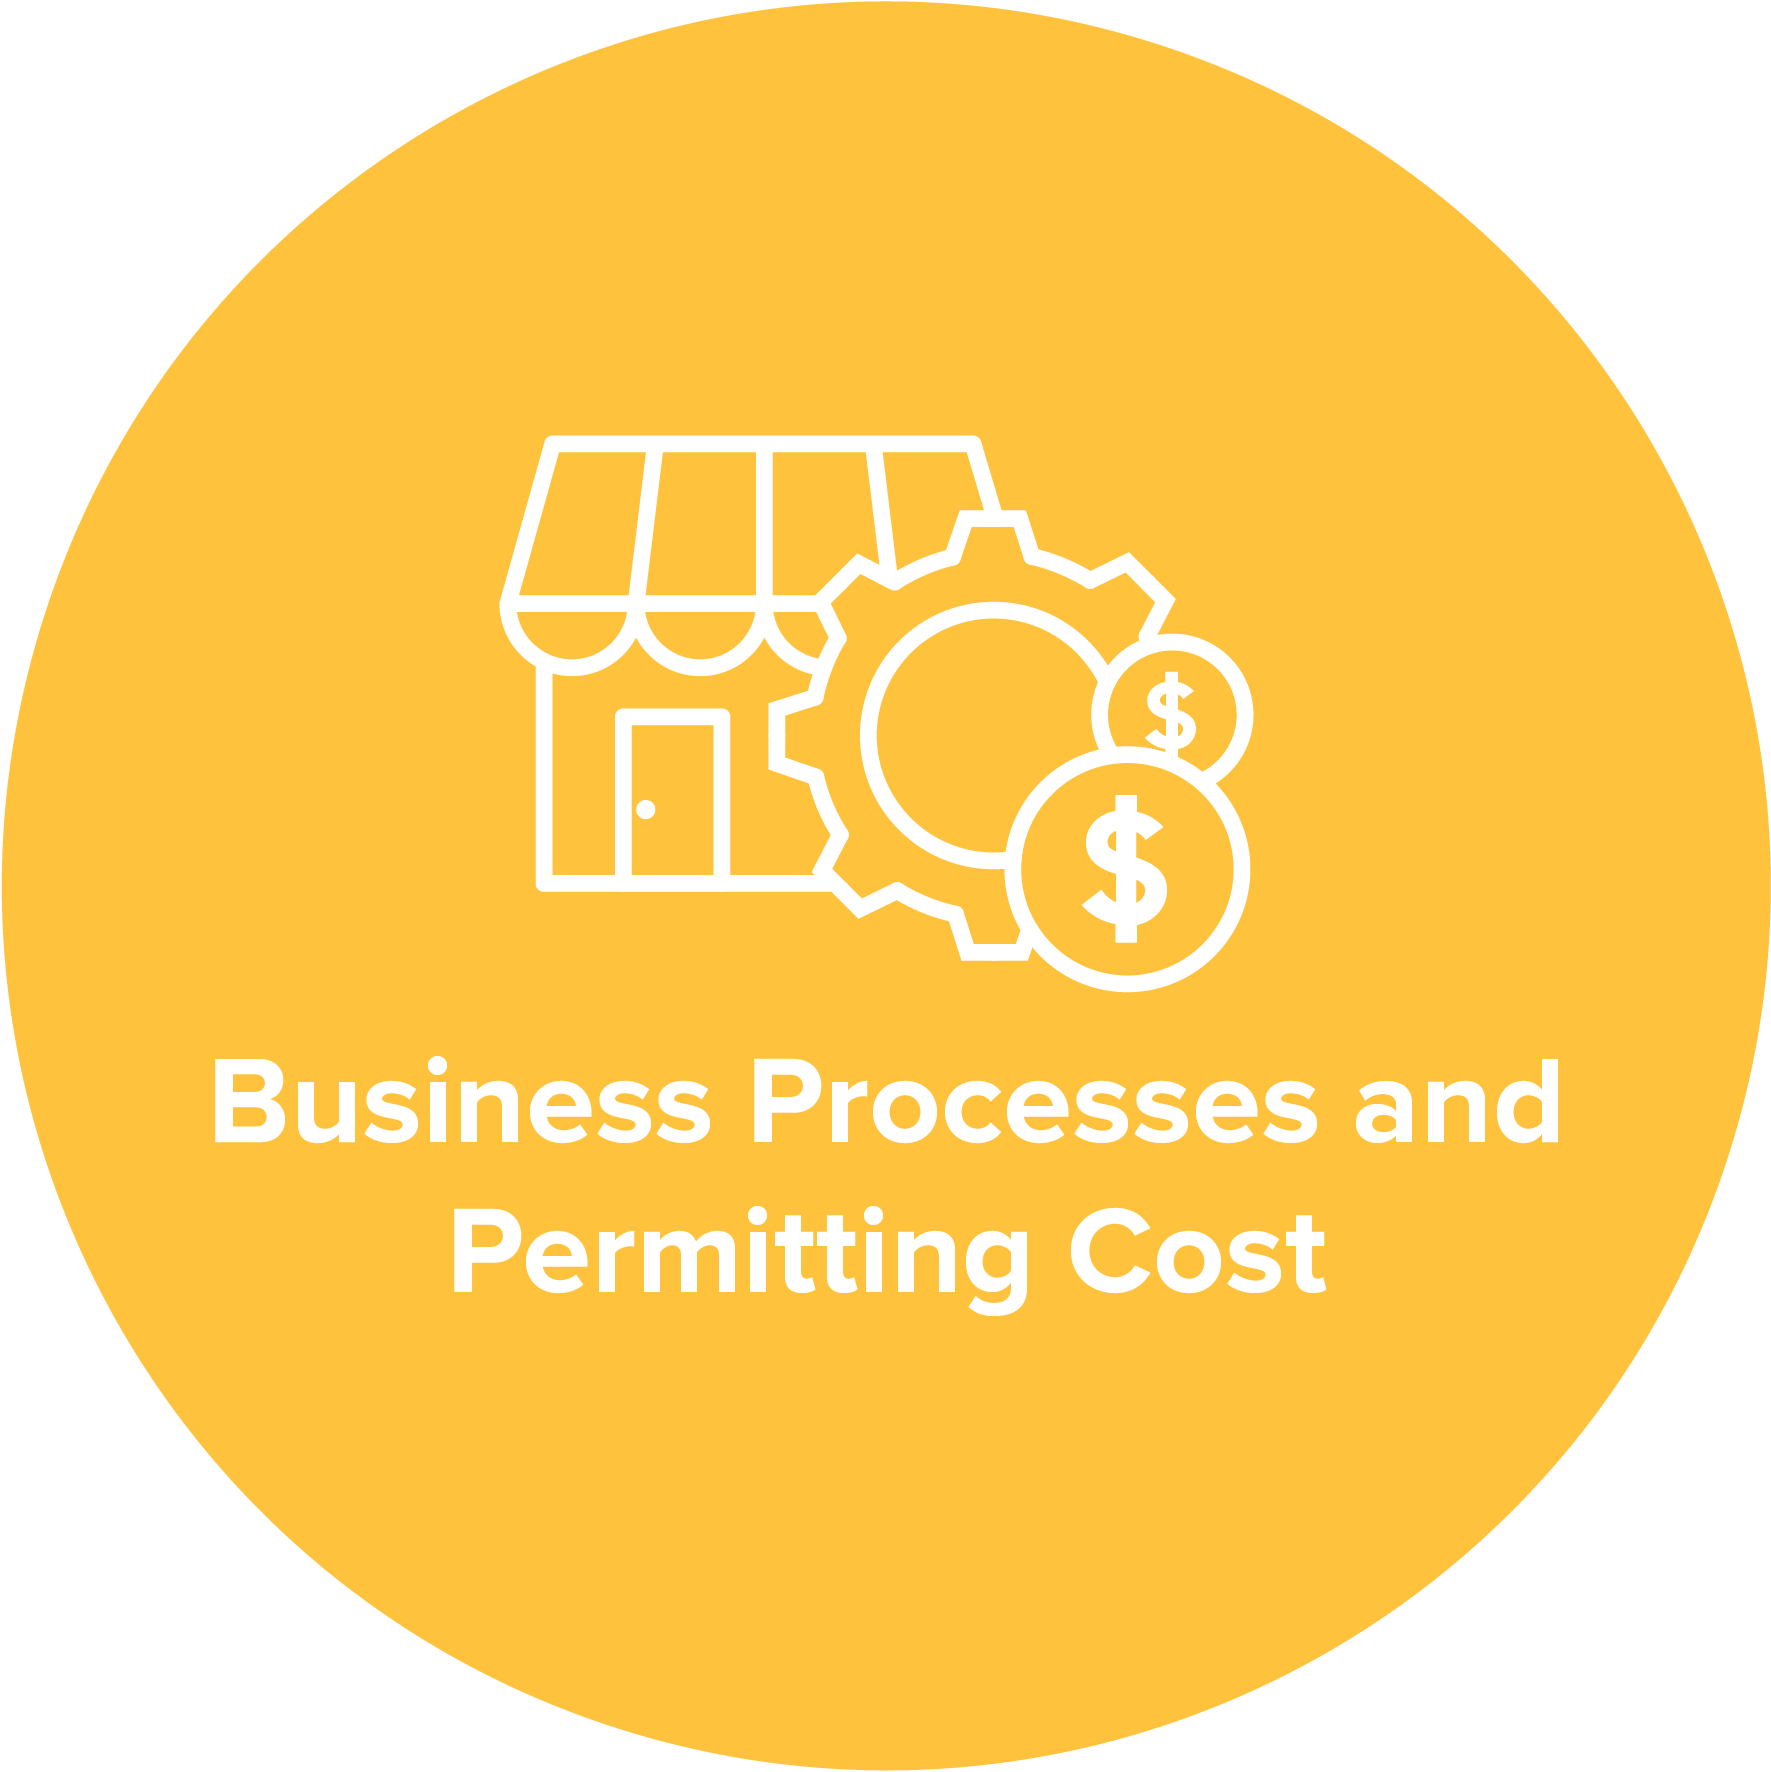 Business Processes and Permitting Cost